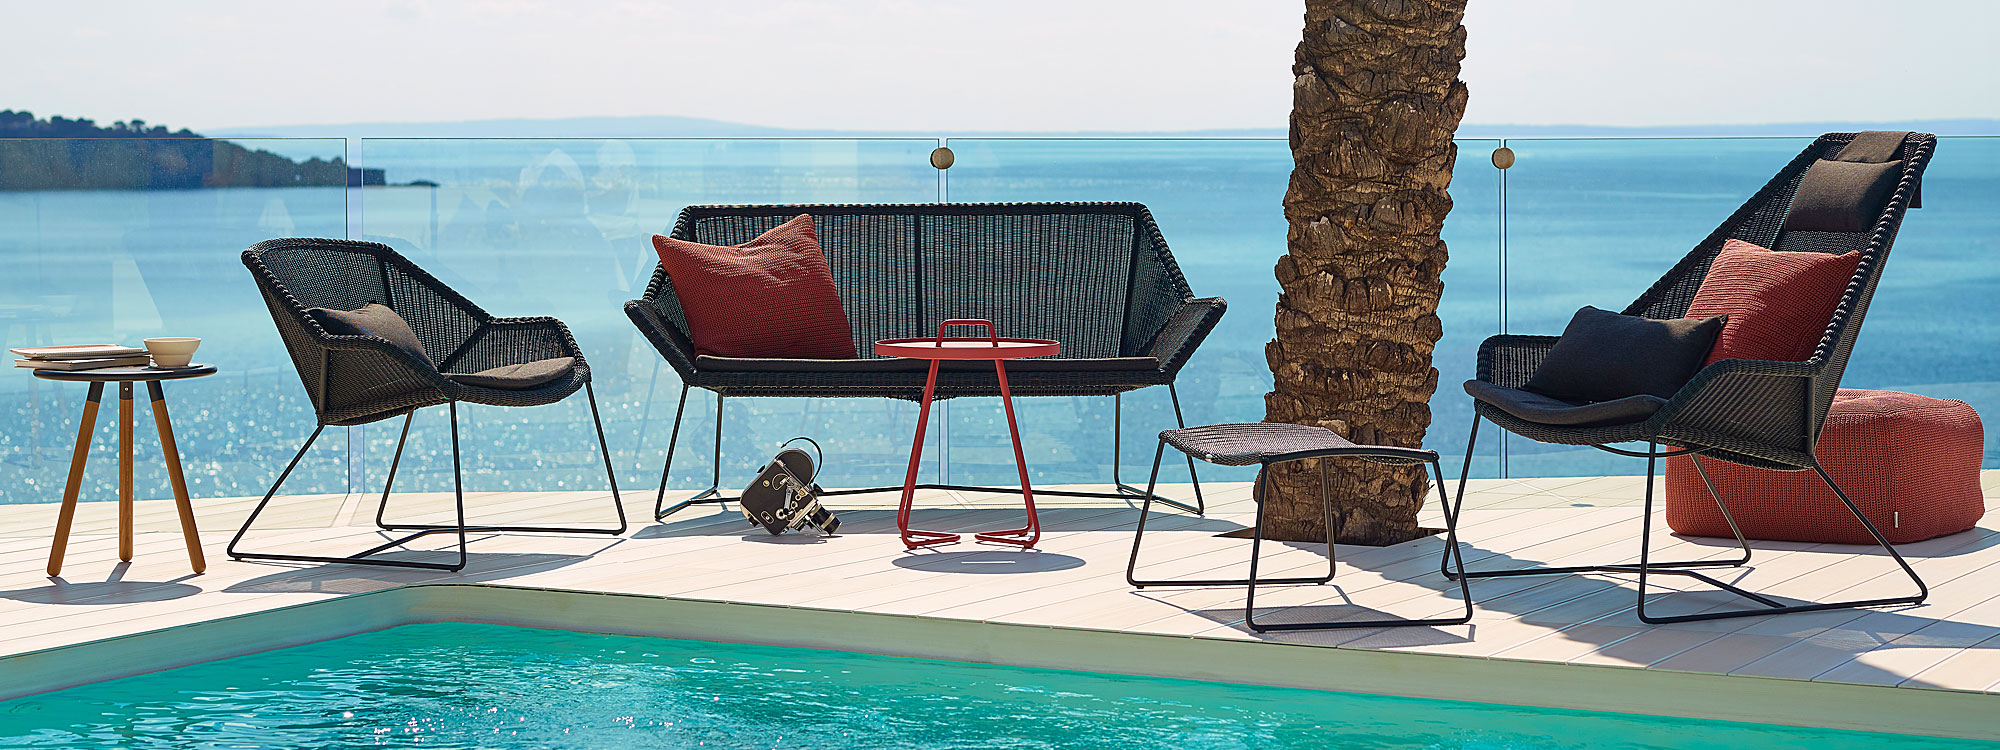 Black Breeze modern outdoor lounge furniture includes a contemporary garden sofa & garden relax chairs by Cane-line all-weather furniture company.